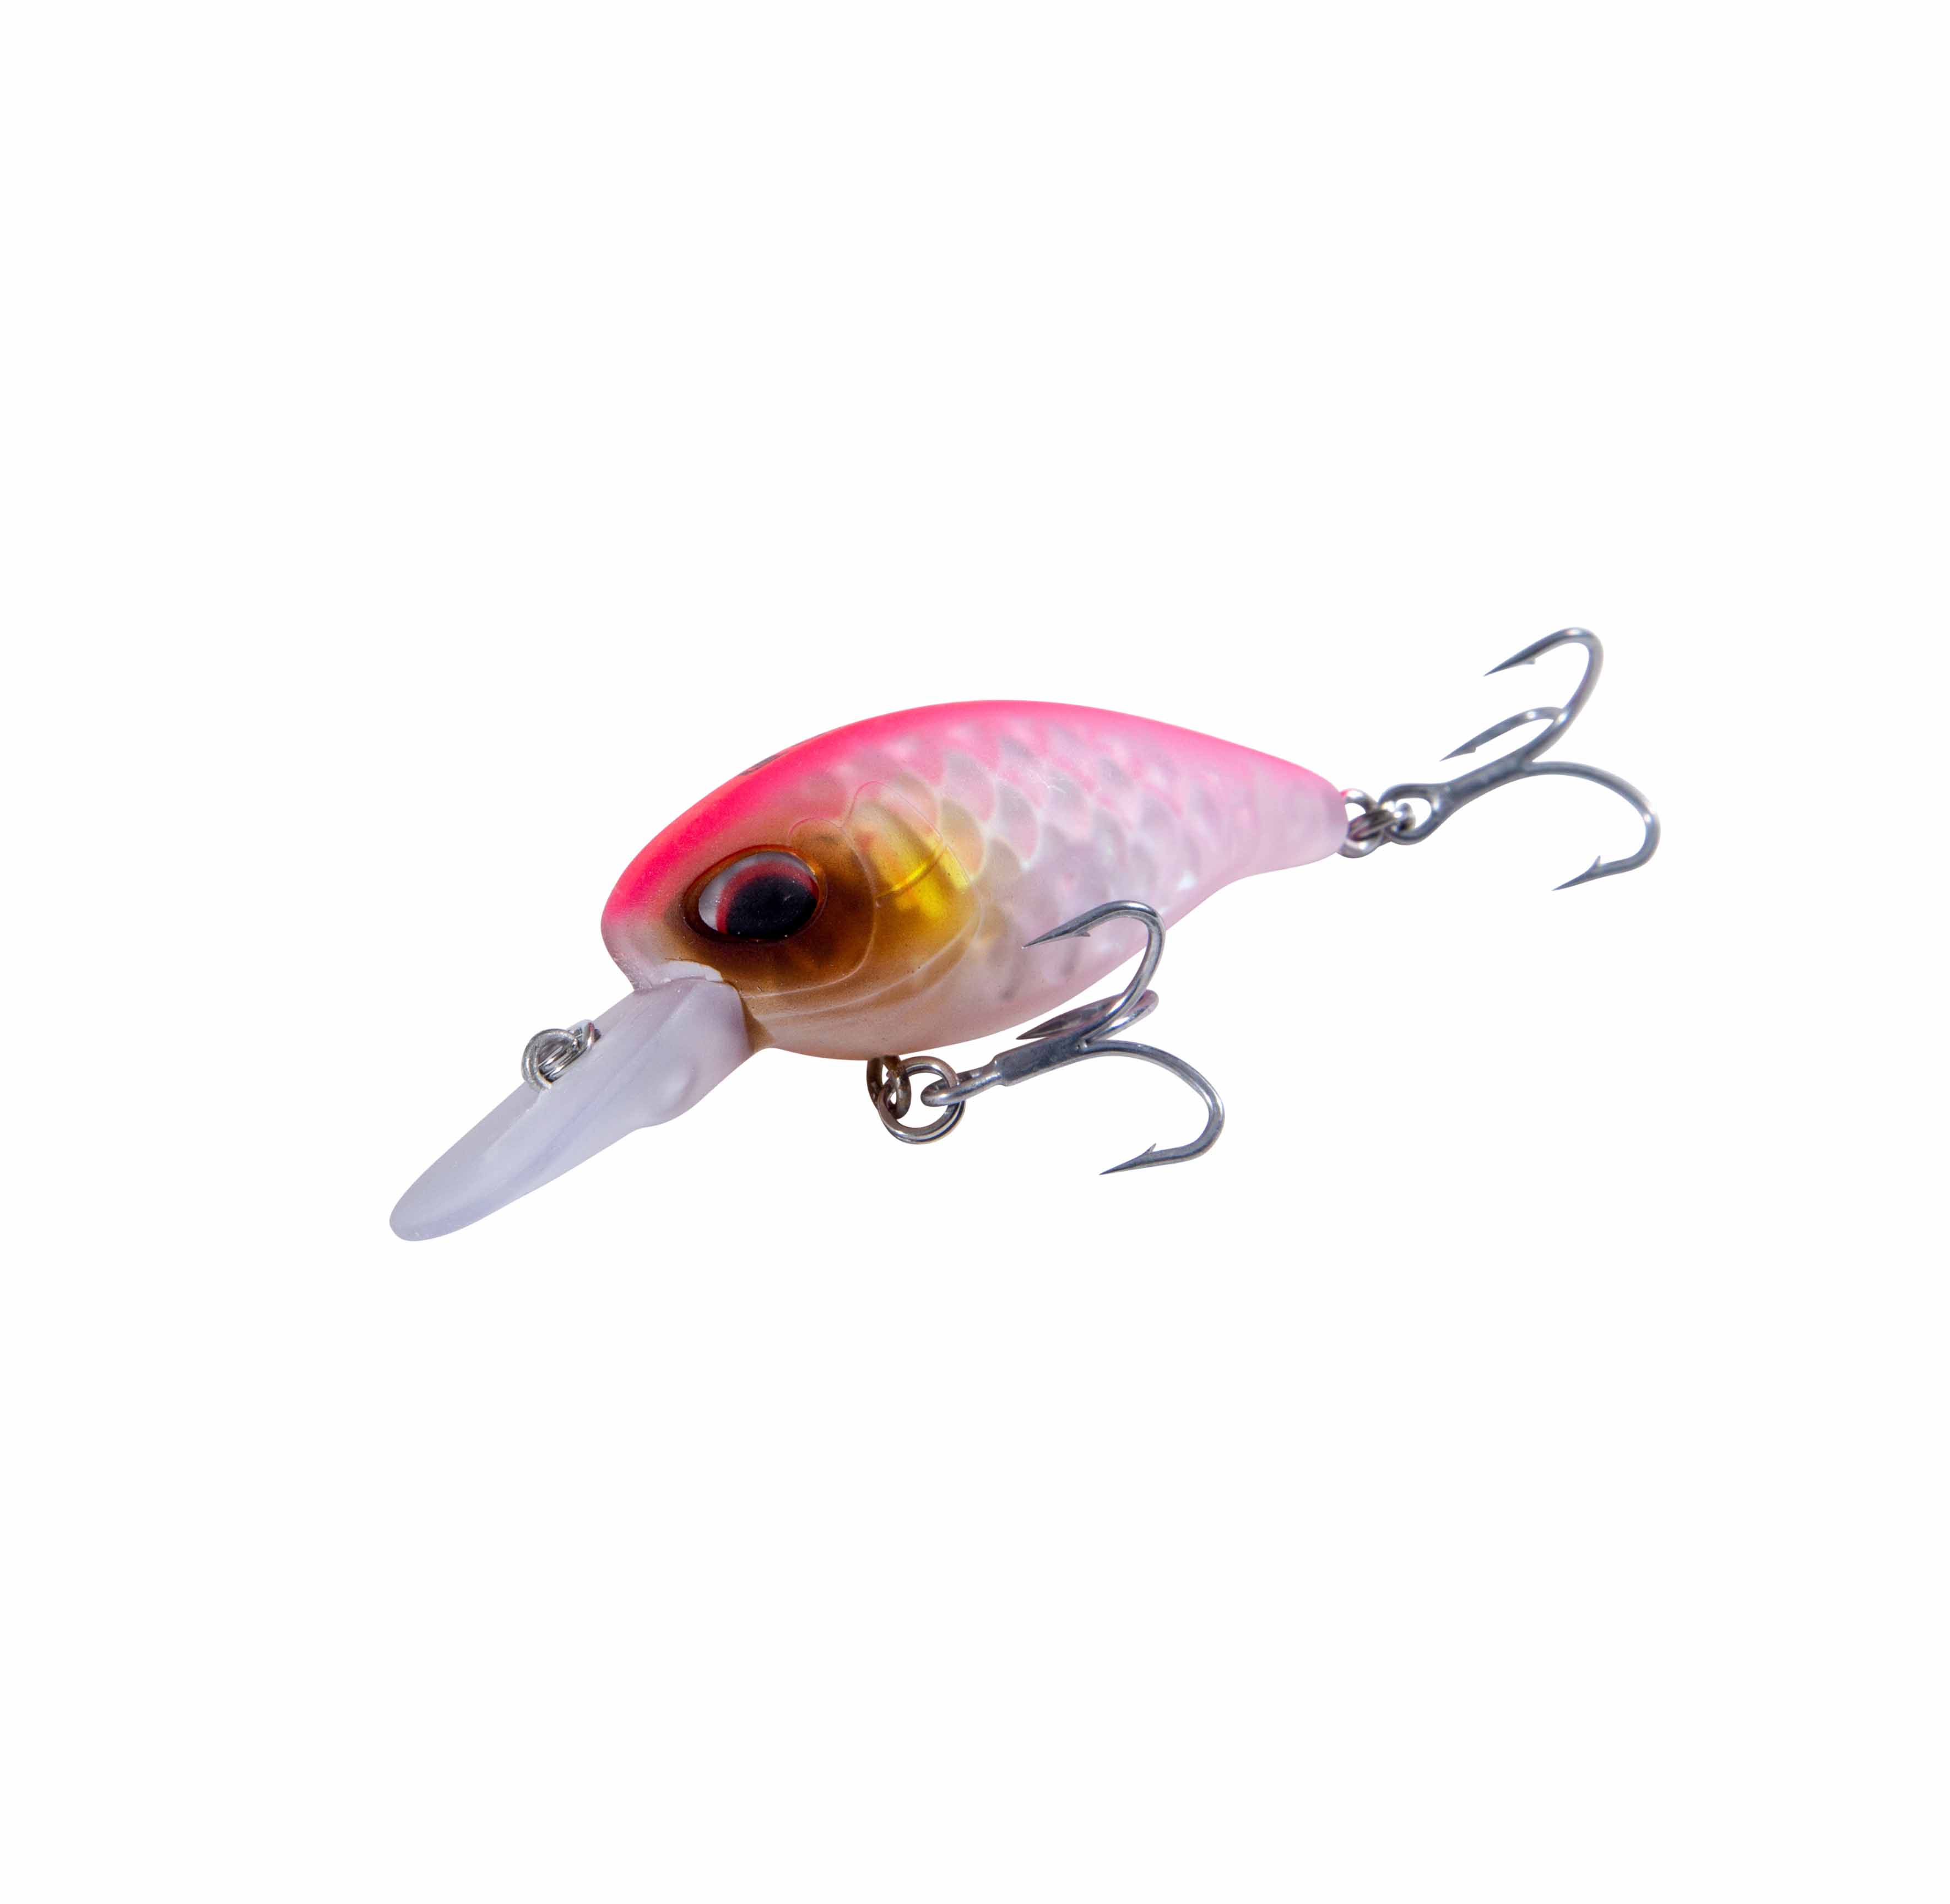 Ultimate X-Chunk Shallow Lure 4.3cm (6g) - Cherry